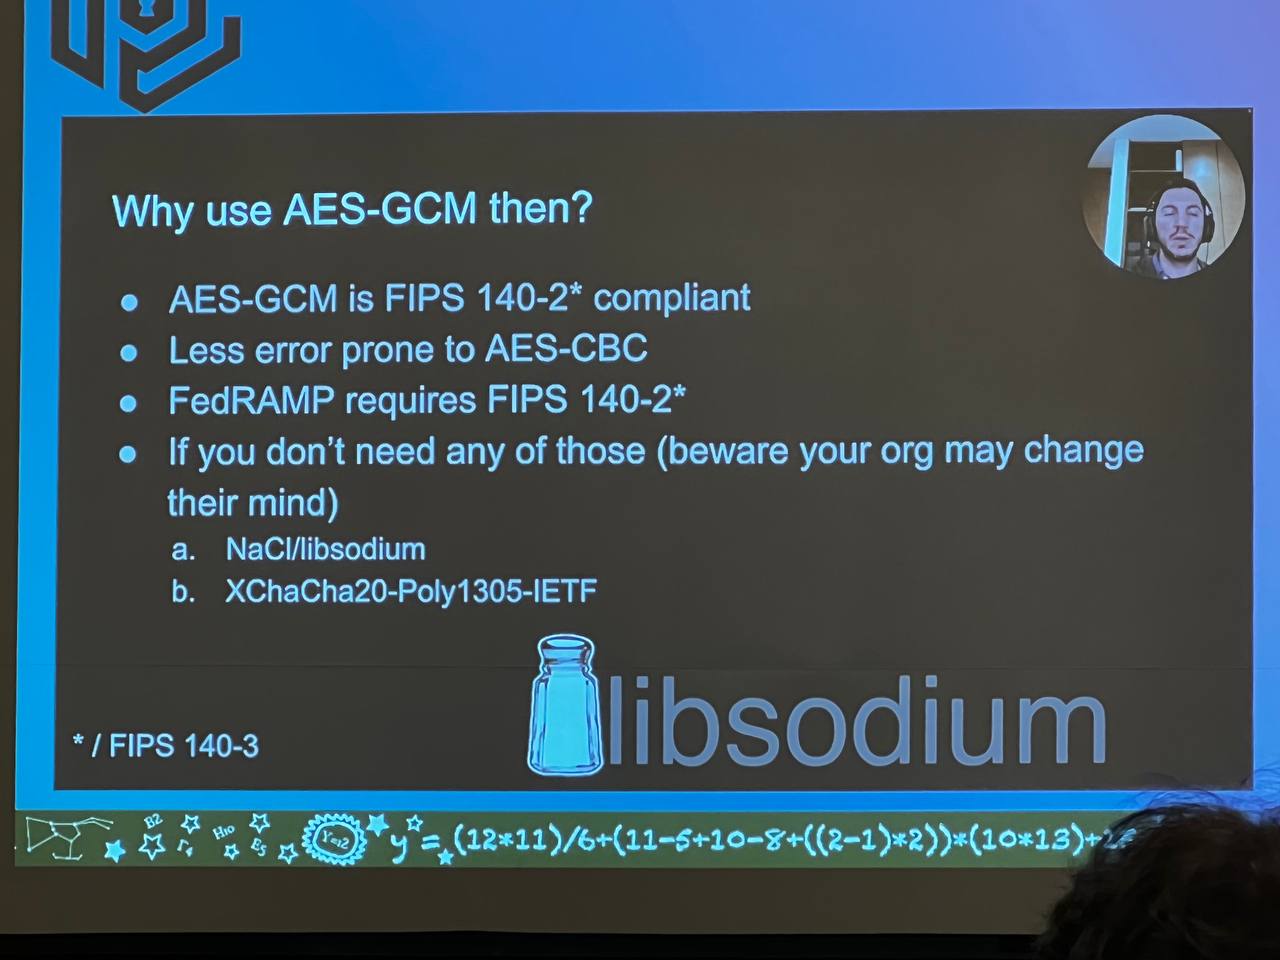 Why use it? It is FIPS compliant, less error prone than CBC, FED Ramp requires FIPS compliance. If you don't need these then consider libsodium or X ChaCha20-Poly1305